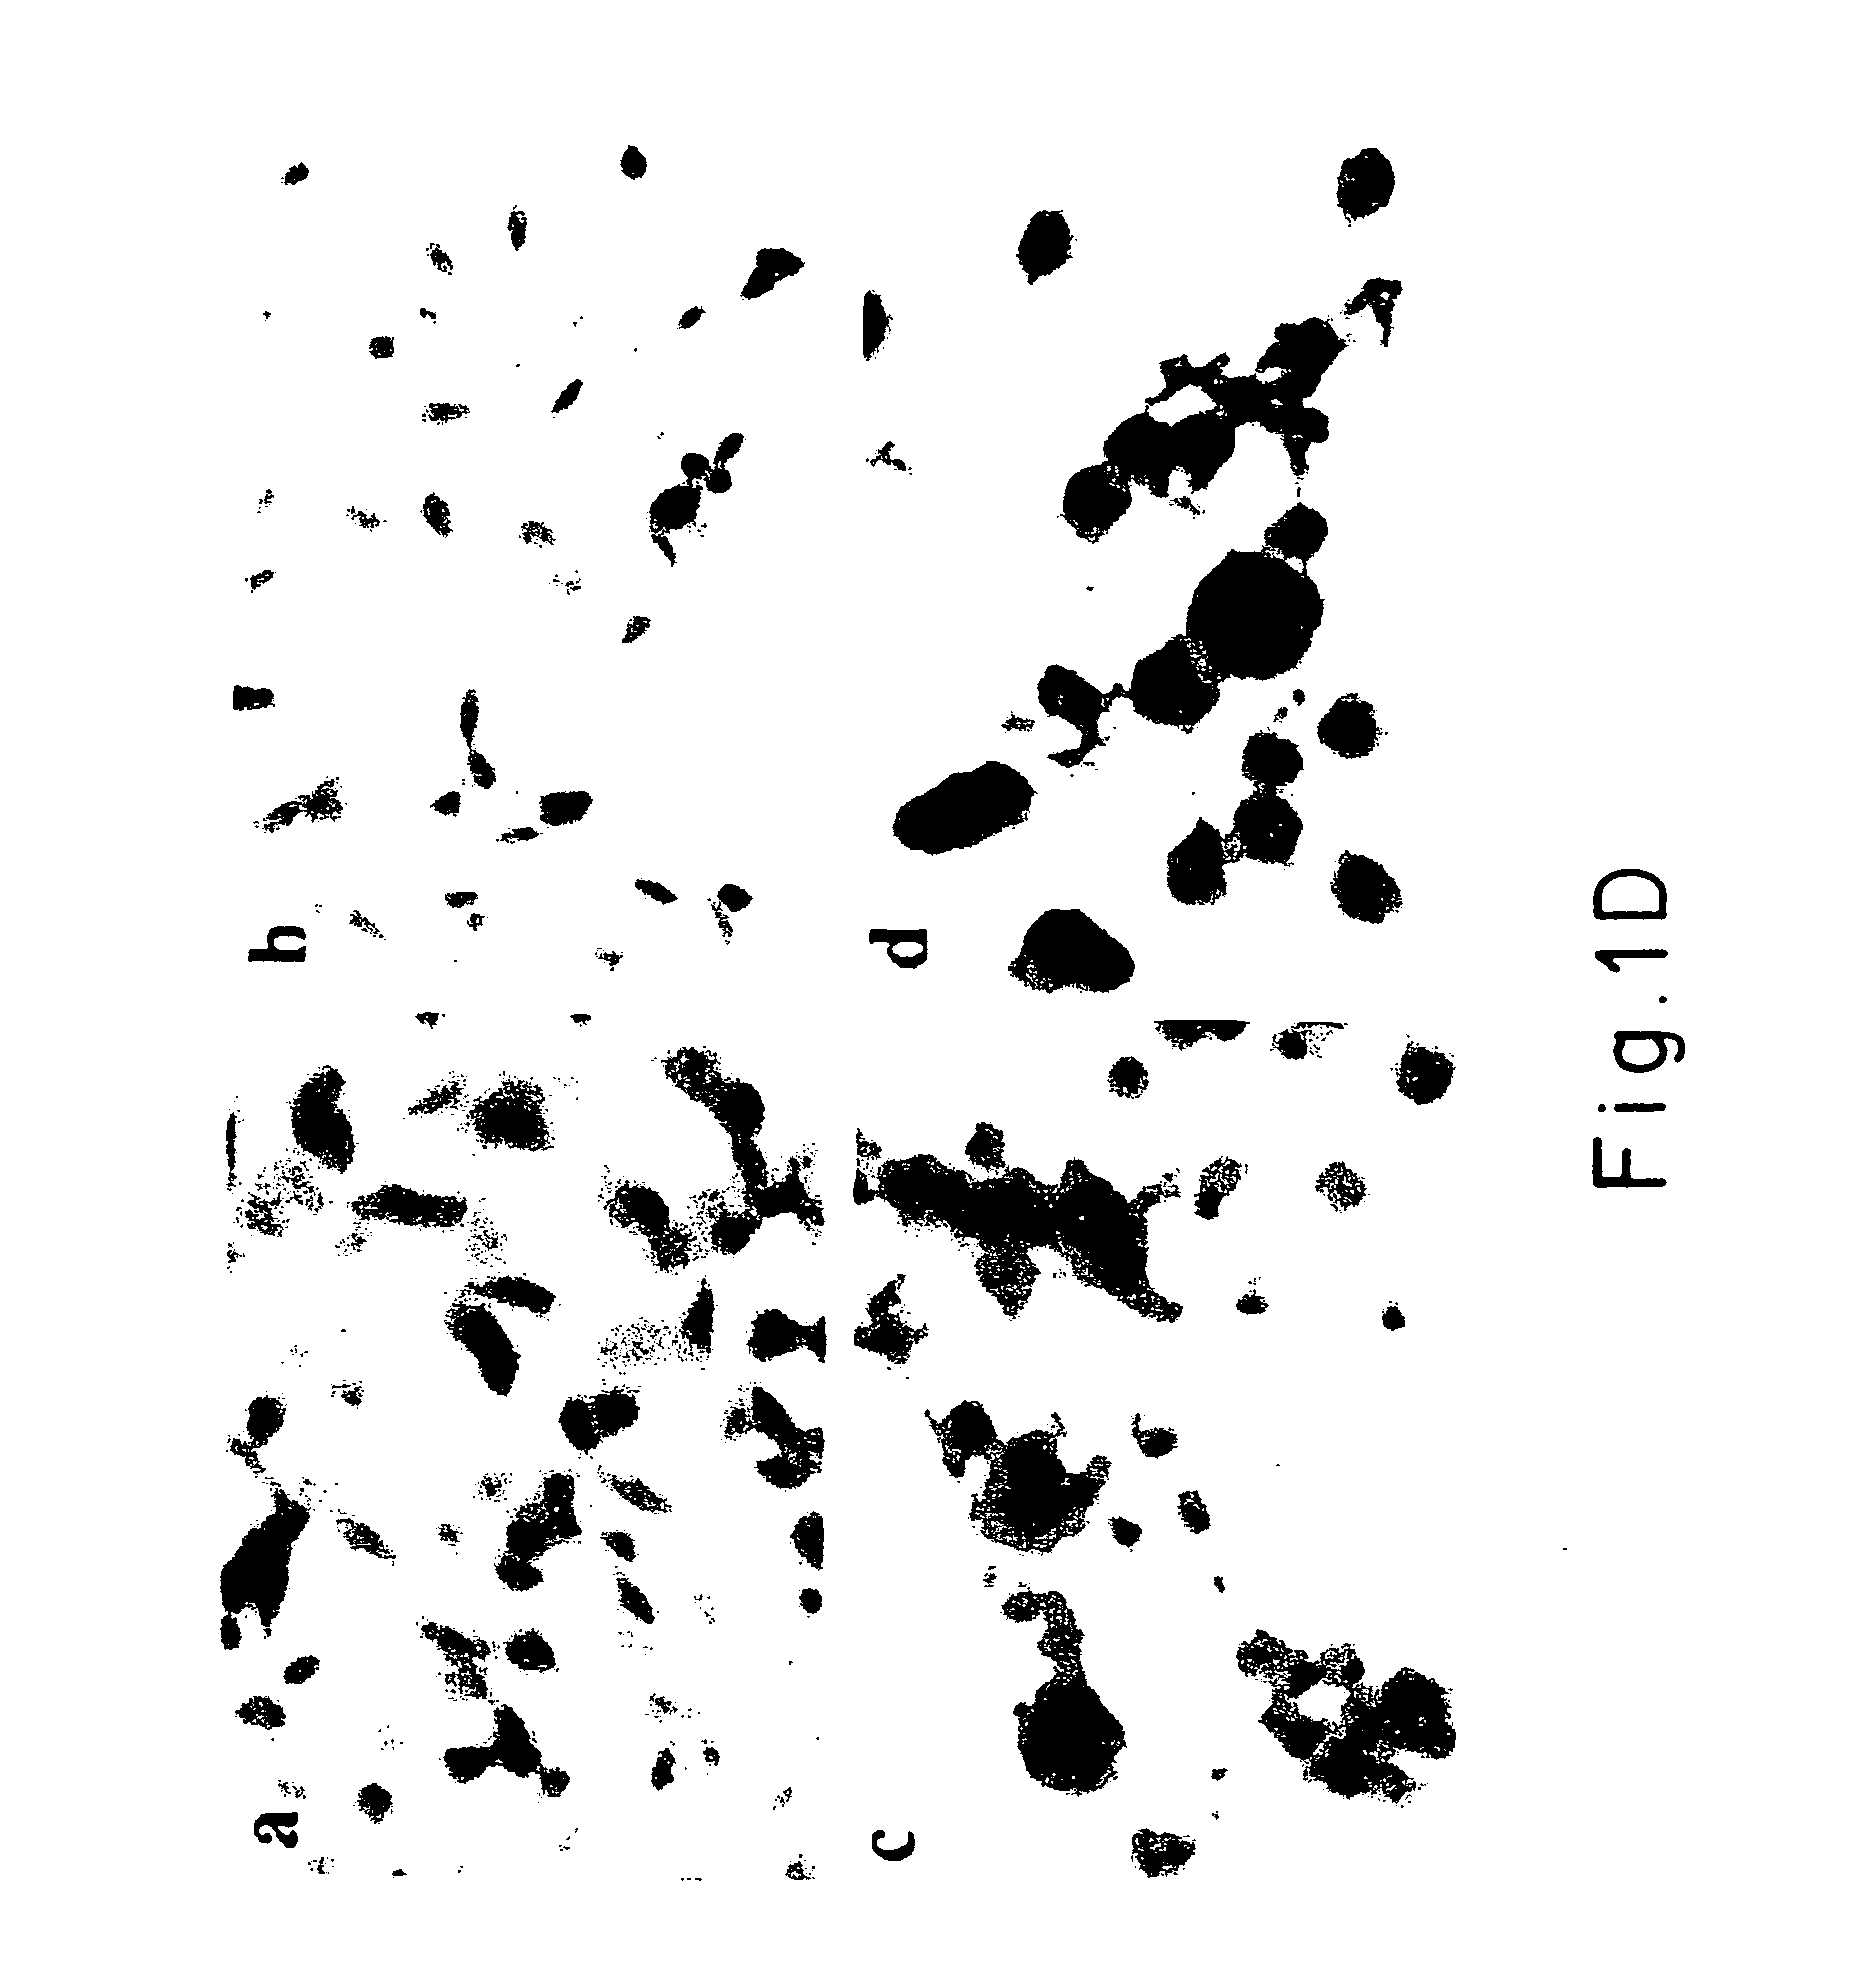 Methods for preventing neural tissue damage and for the treatment of alpha-synuclein diseases